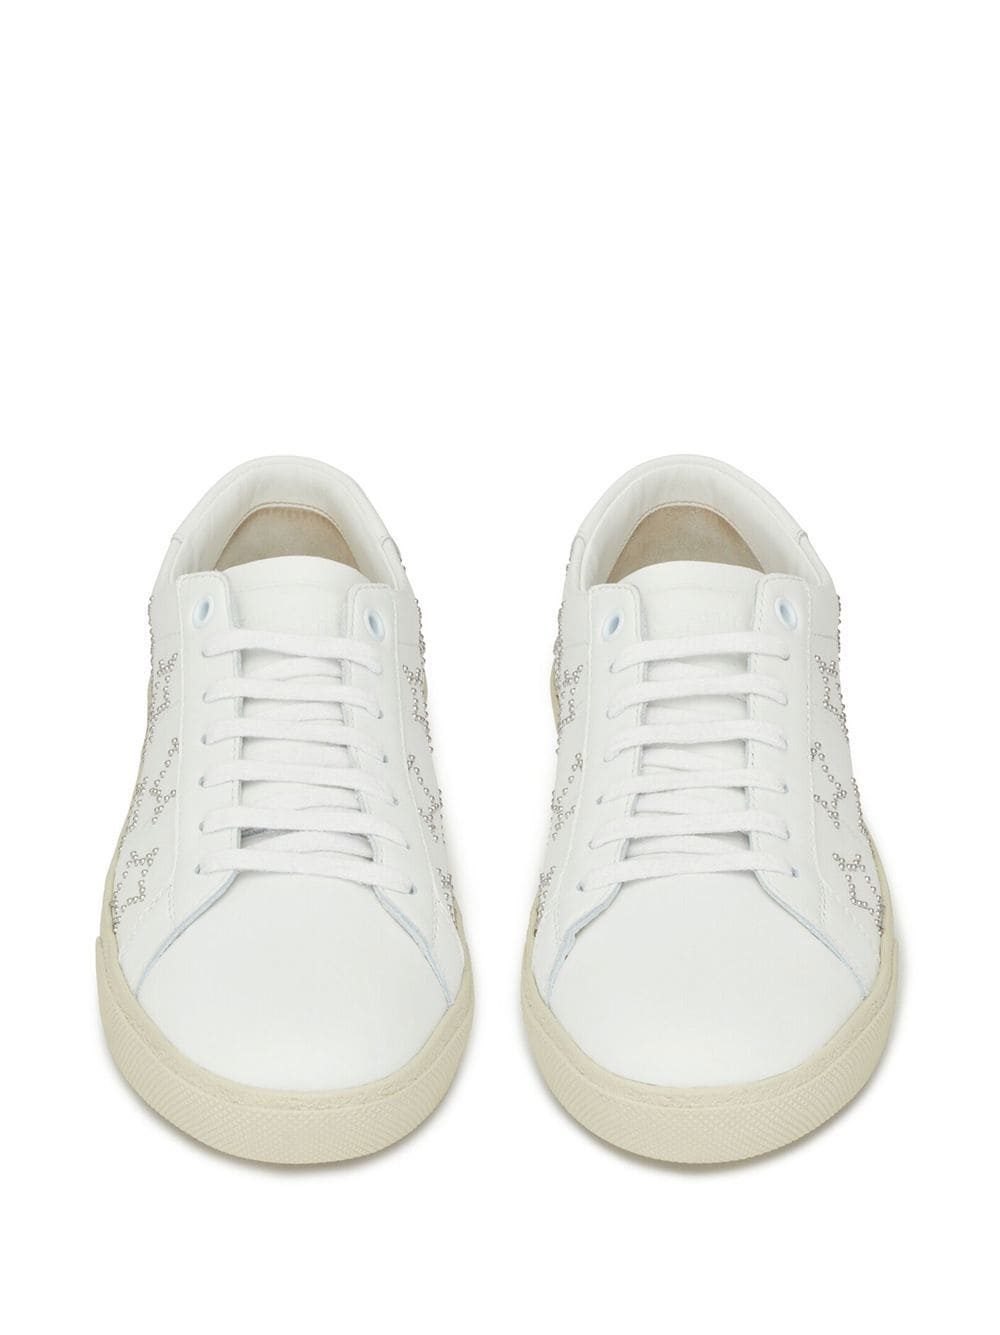 Court Classic SL/06 Star sneakers